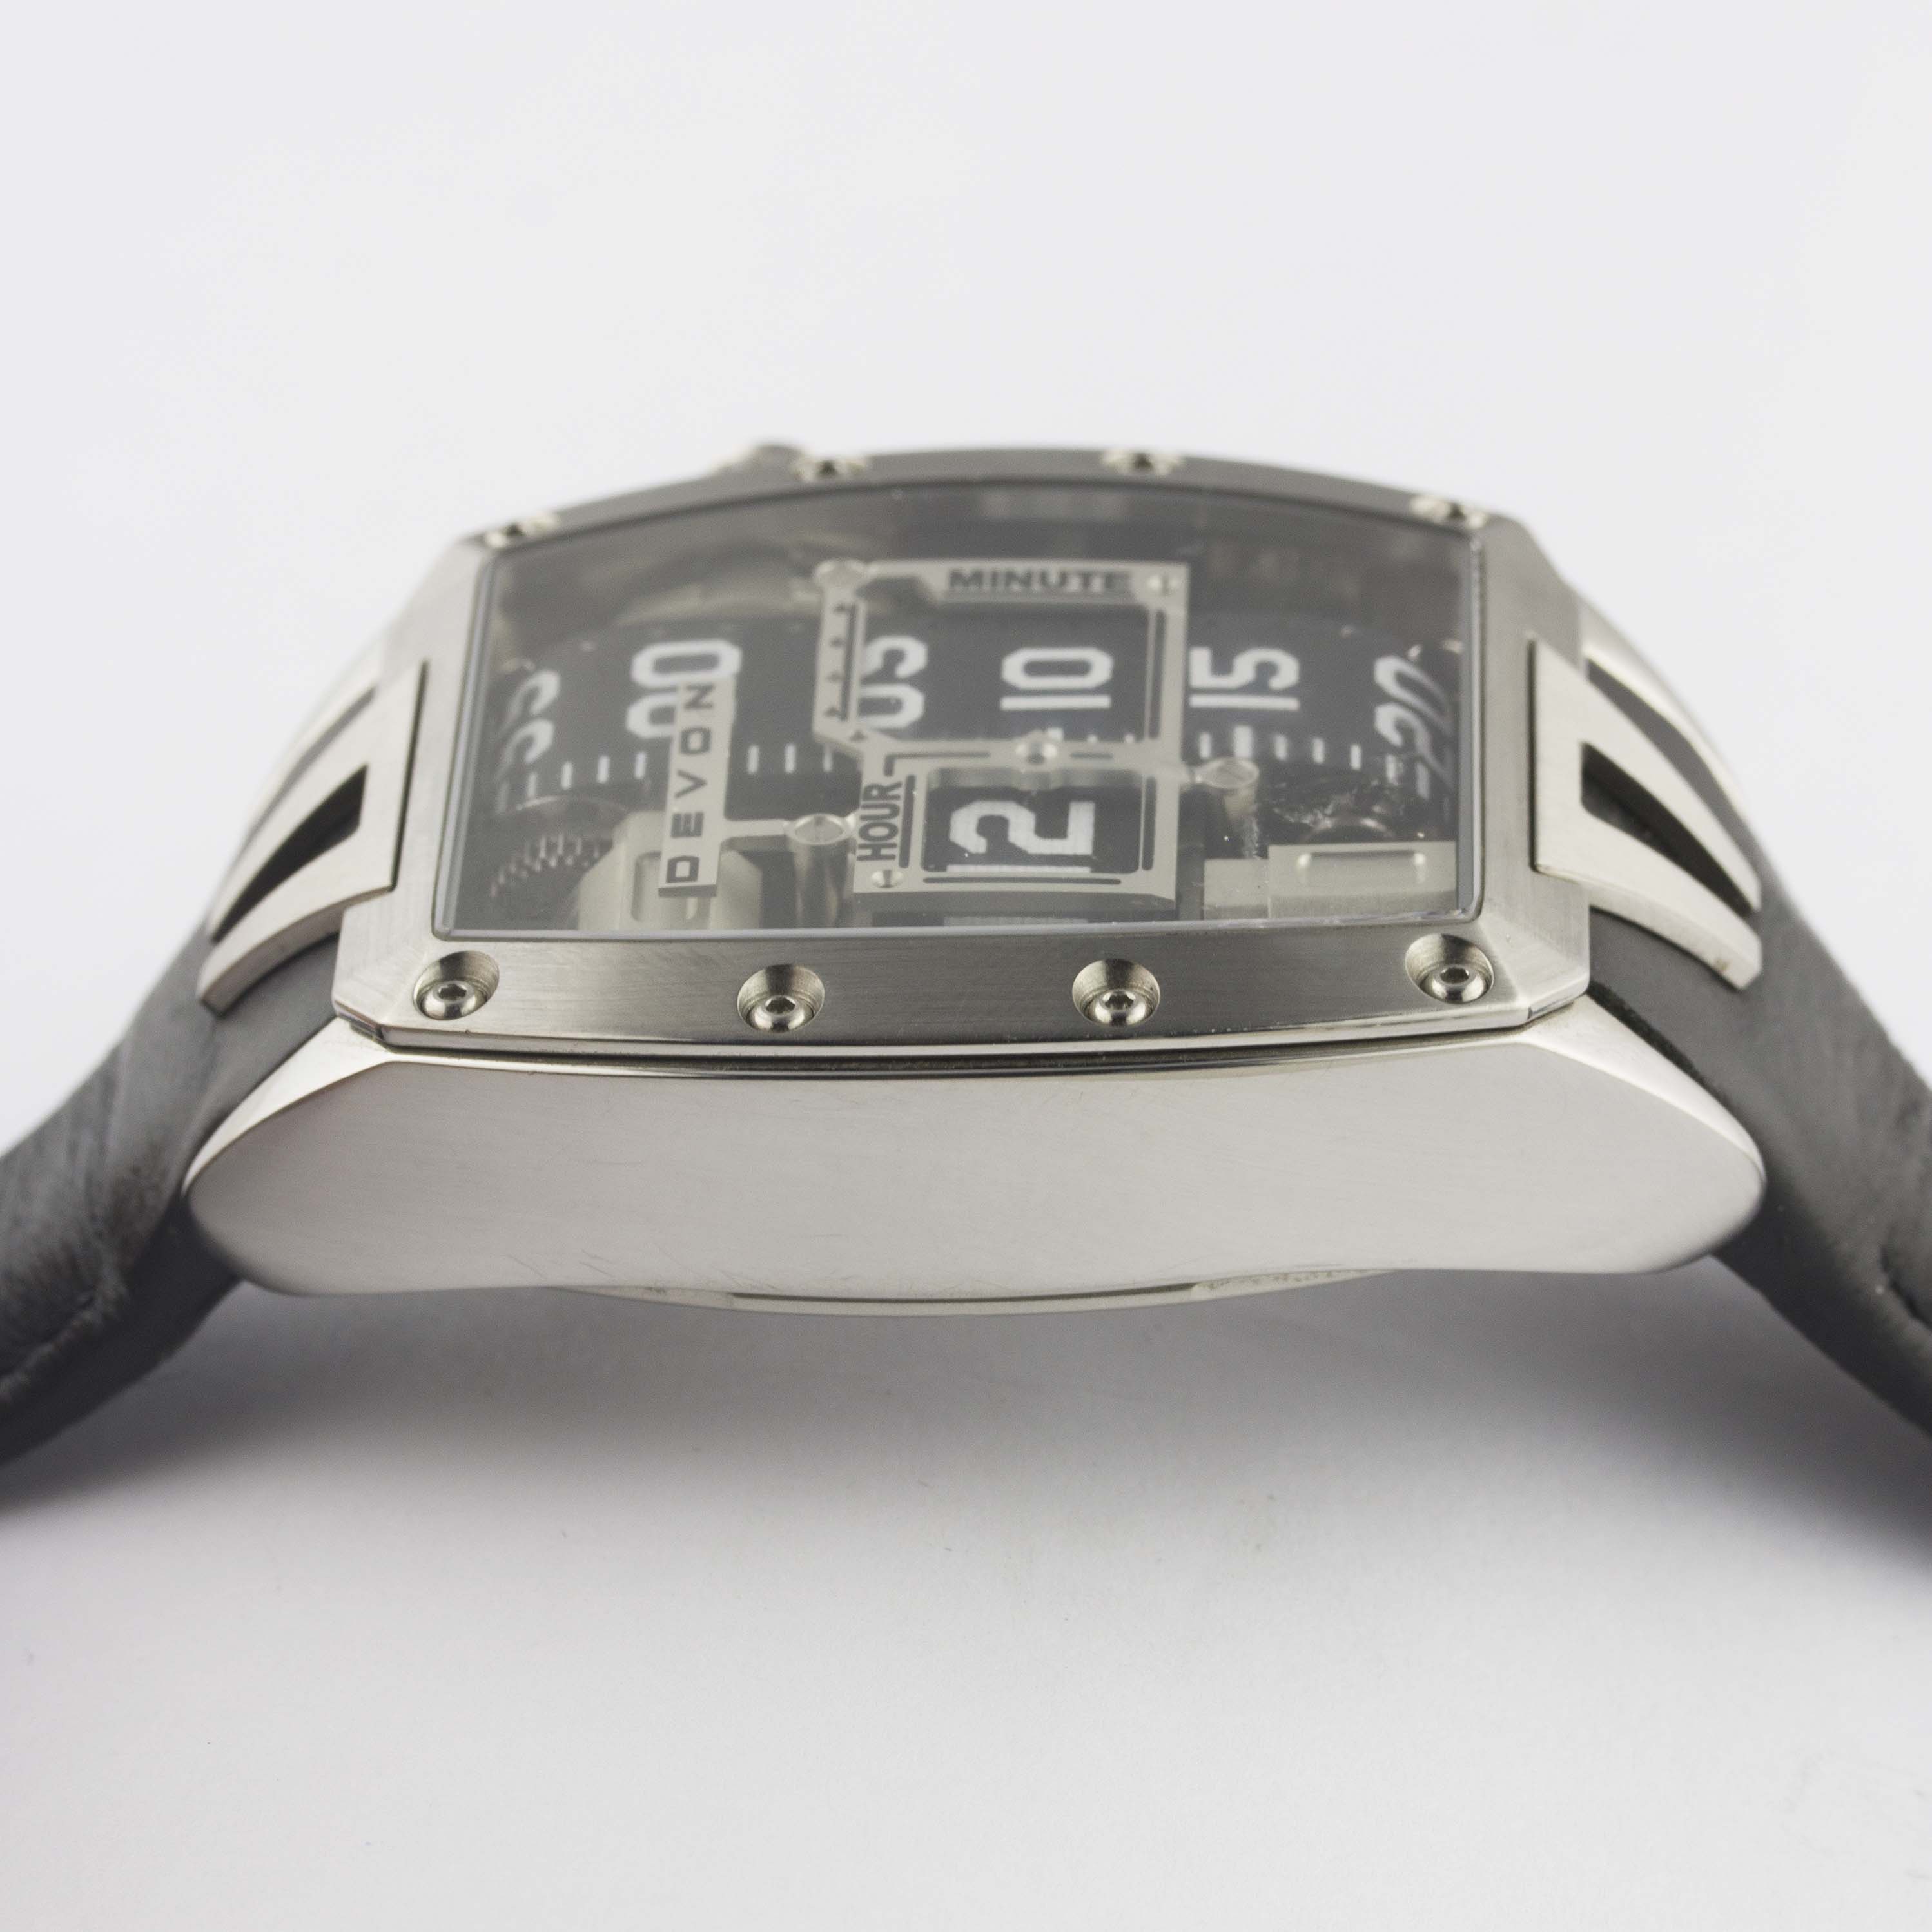 A GENTLEMAN'S STAINLESS STEEL DEVON TREAD 2 TIME BELT SHINING WRIST WATCH DATED 2014, WITH - Image 7 of 8